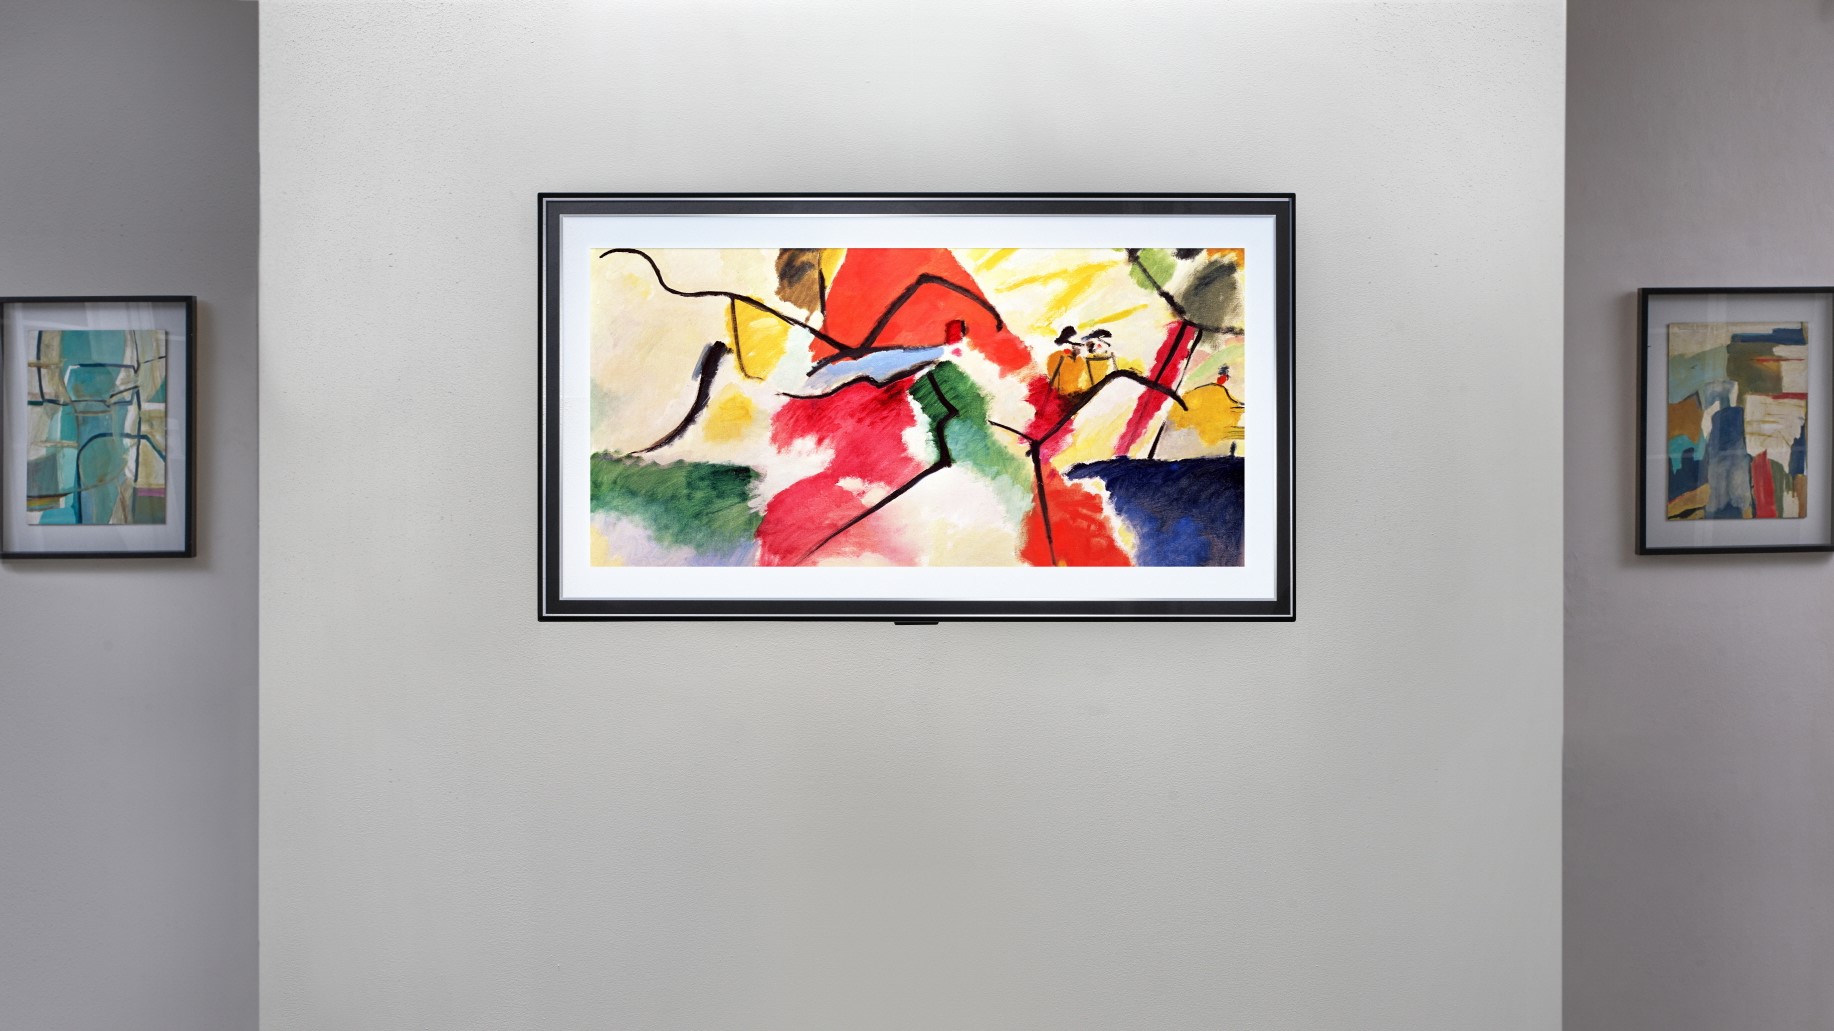 LG GX ‘Gallery’ Series OLED wall mounted near other paintings